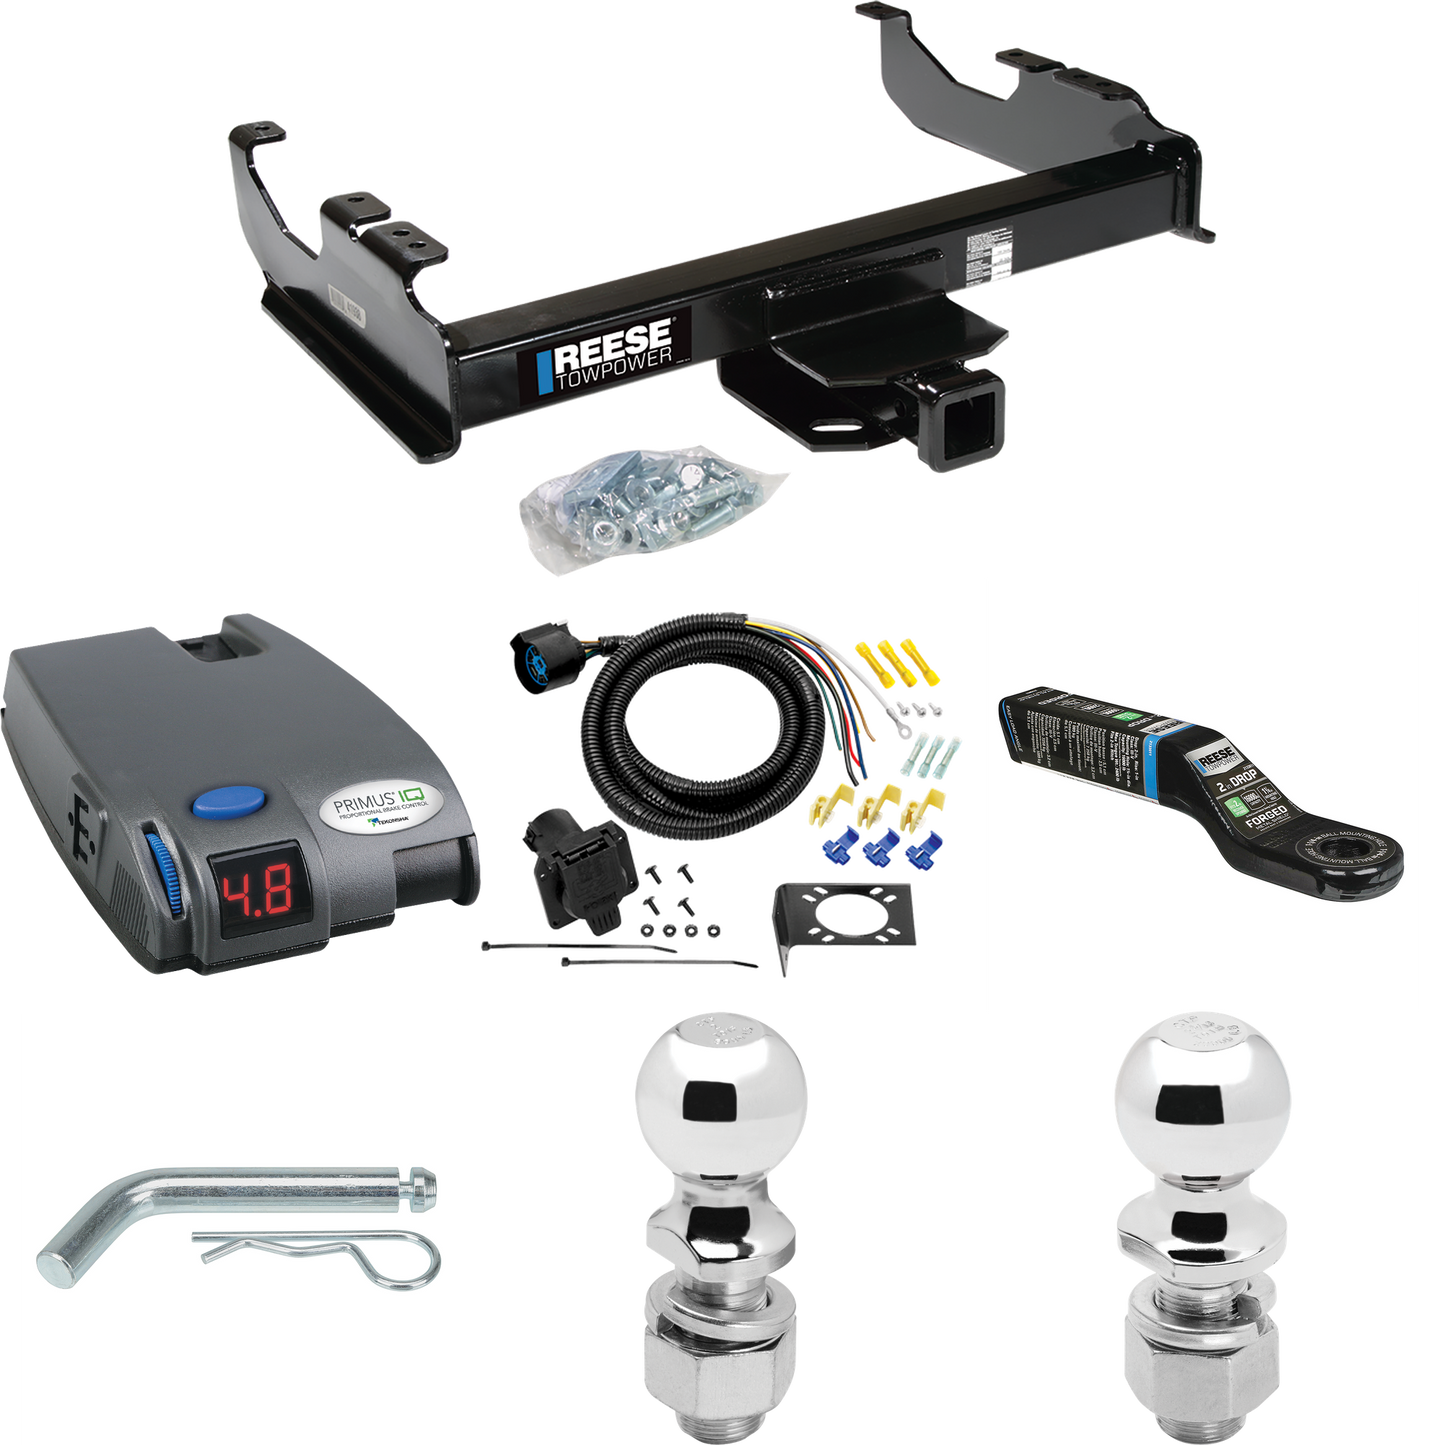 Fits 1985-1986 Chevrolet K30 Trailer Hitch Tow PKG w/ Tekonsha Primus IQ Brake Control + 7-Way RV Wiring + 2" & 2-5/16" Ball & Drop Mount (For w/34" Wide Frames Models) By Reese Towpower